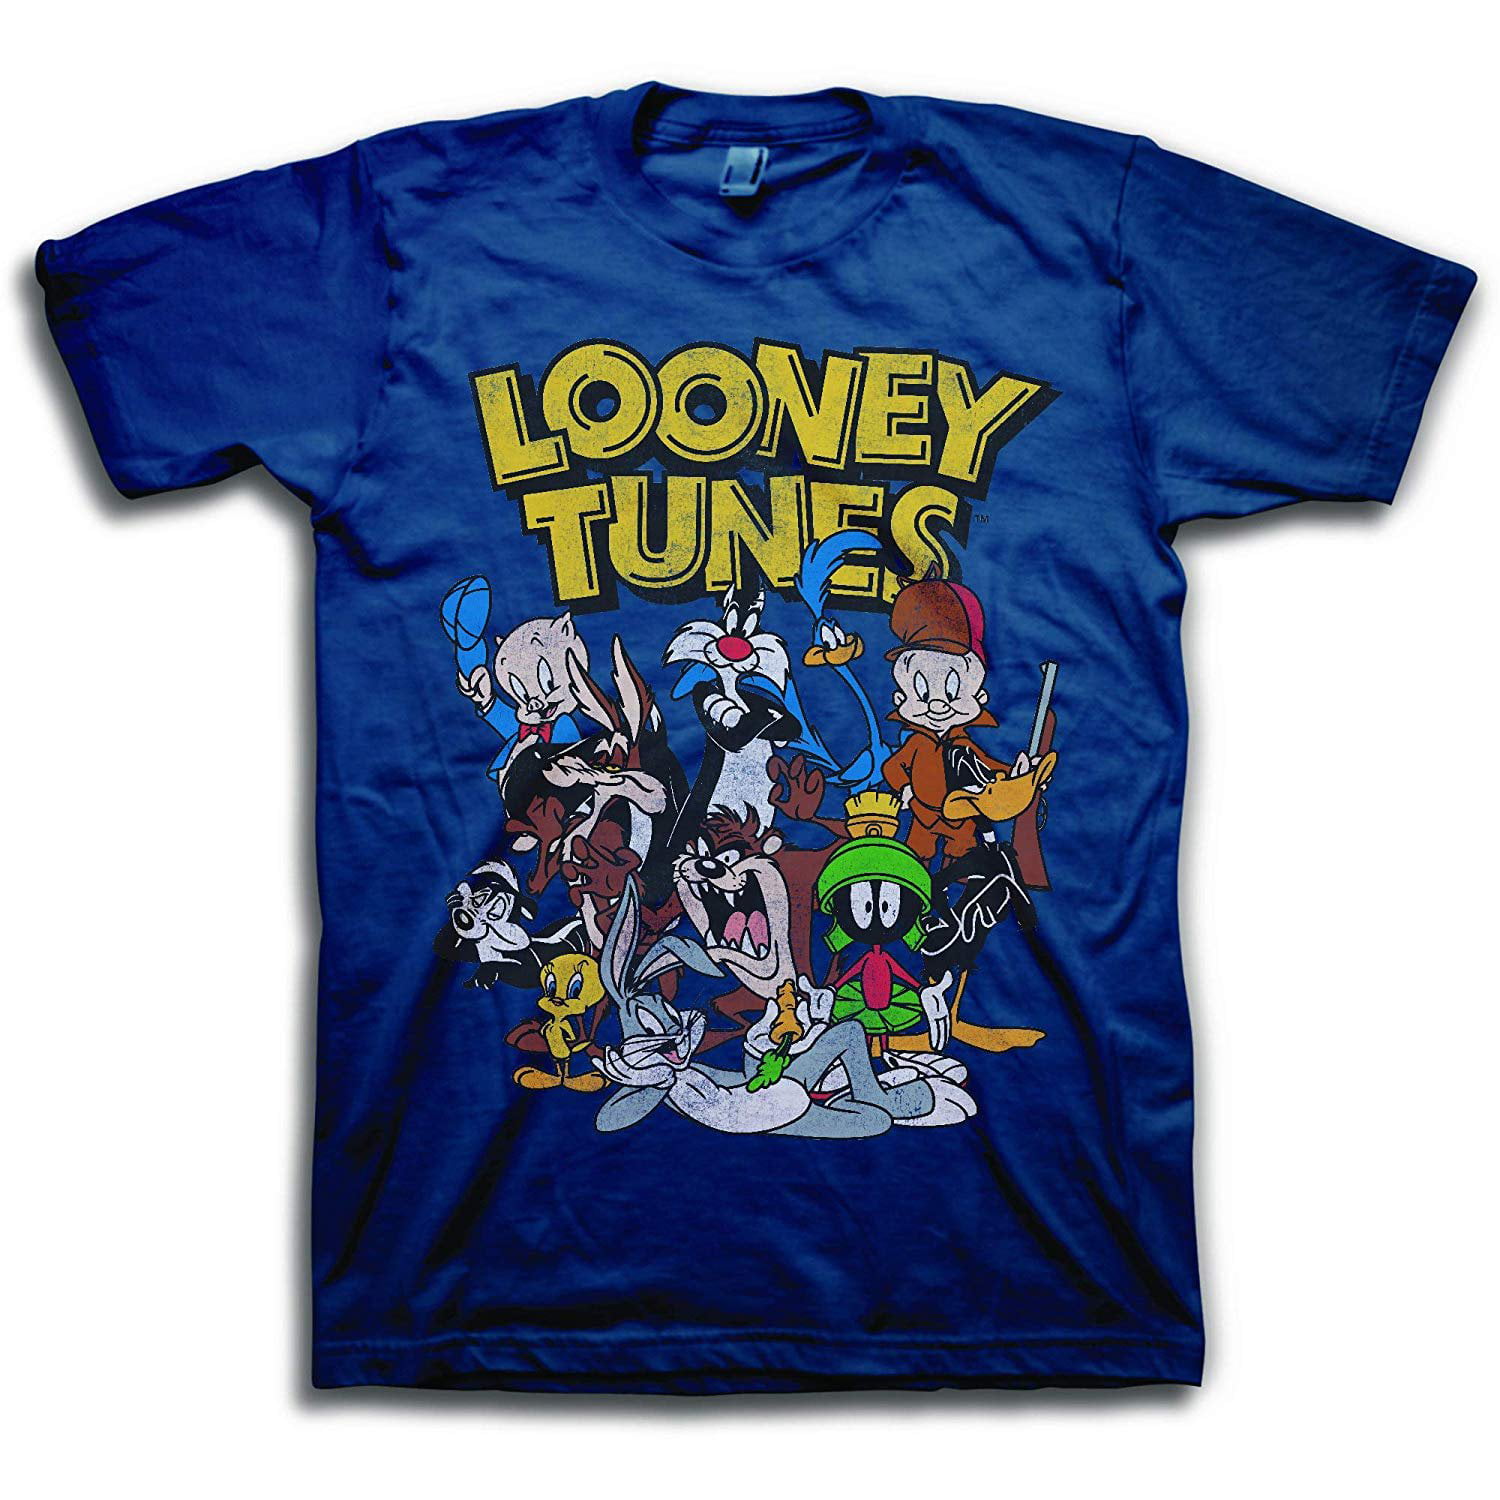 Six Flags Magic Mountain 2020 Looney Tunes Character Blue T-Shirt Size XX-Large 